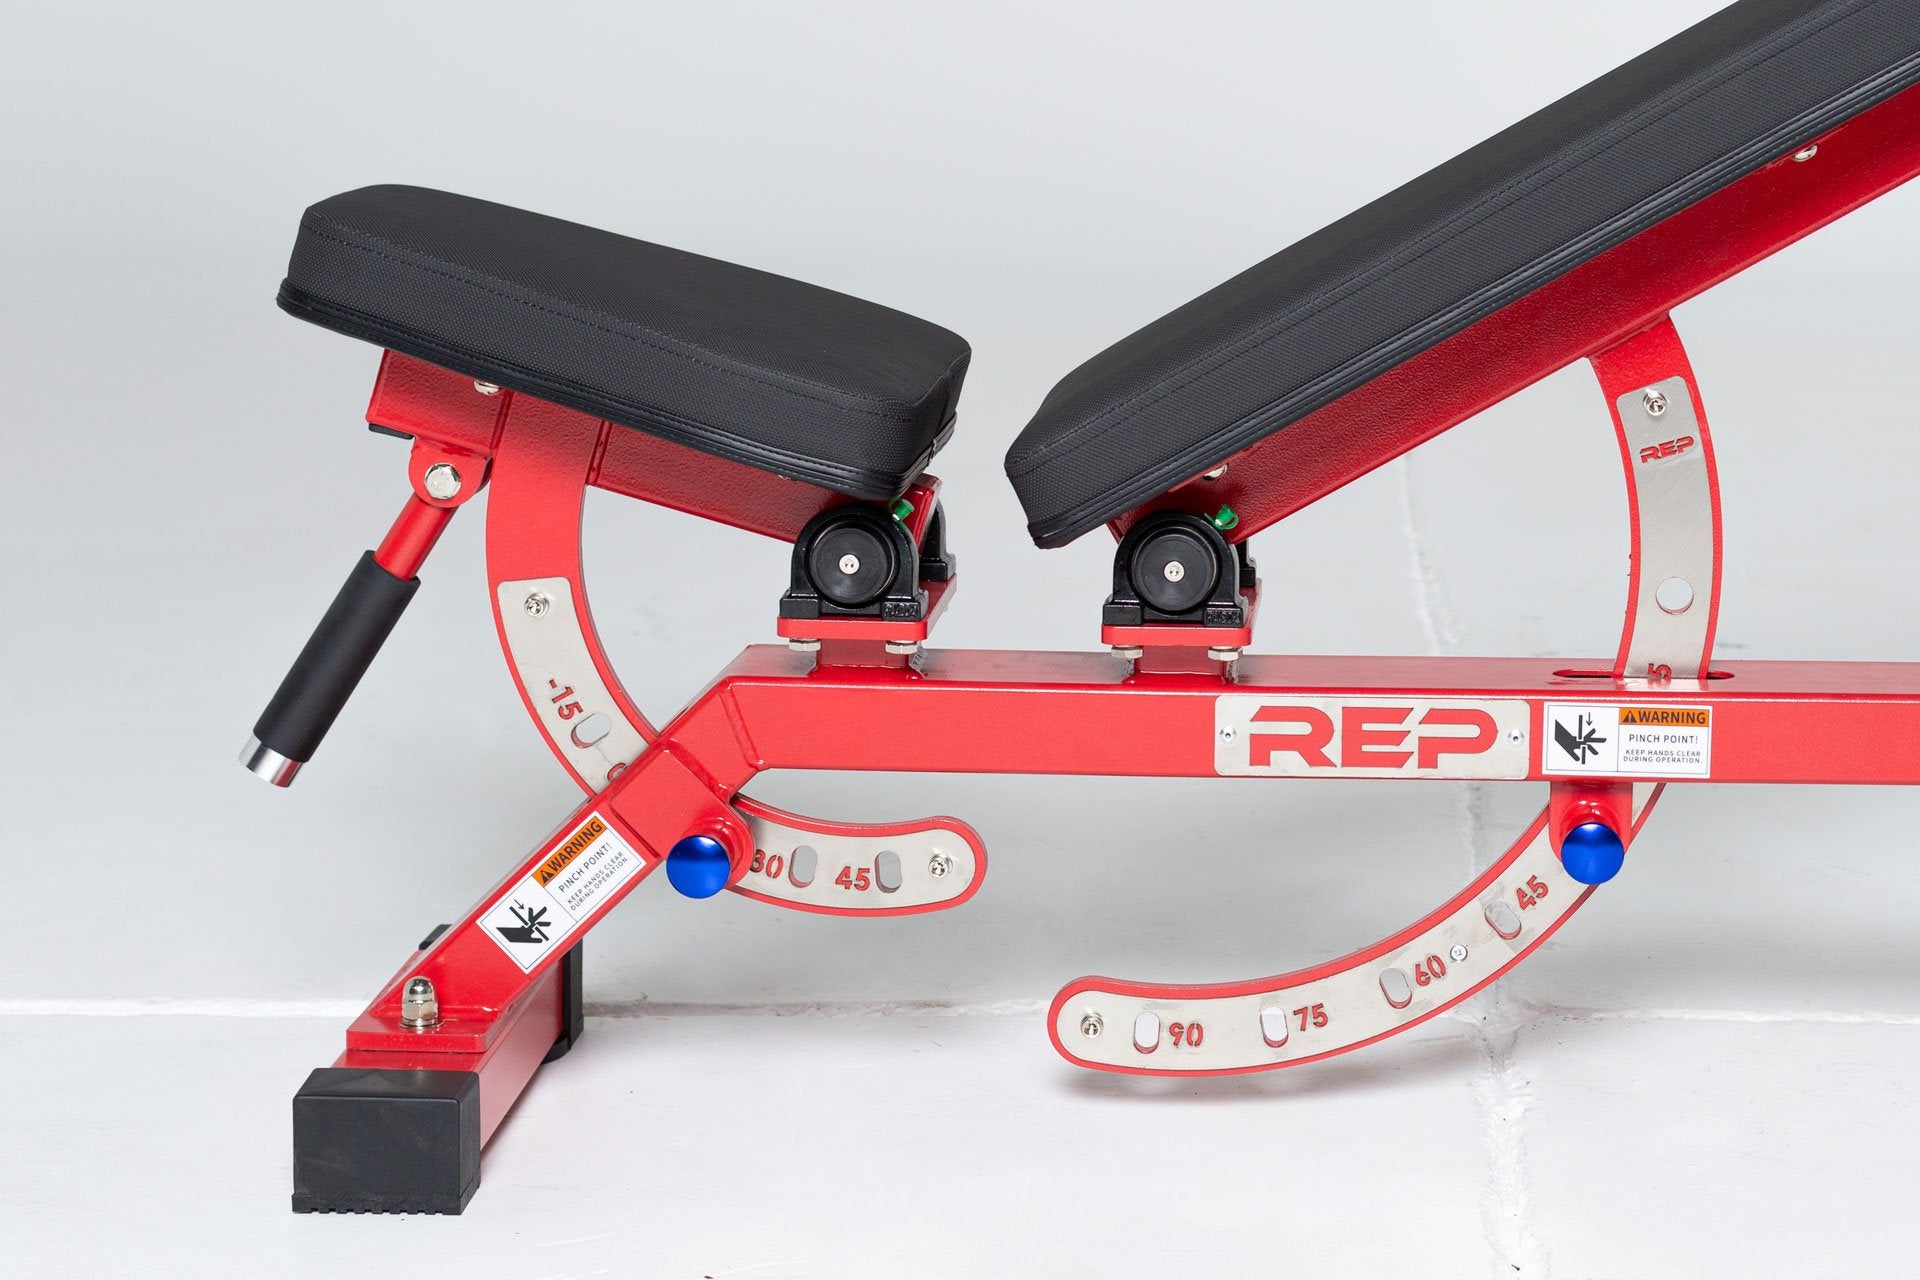 AB-5100 Adjustable Weight Bench